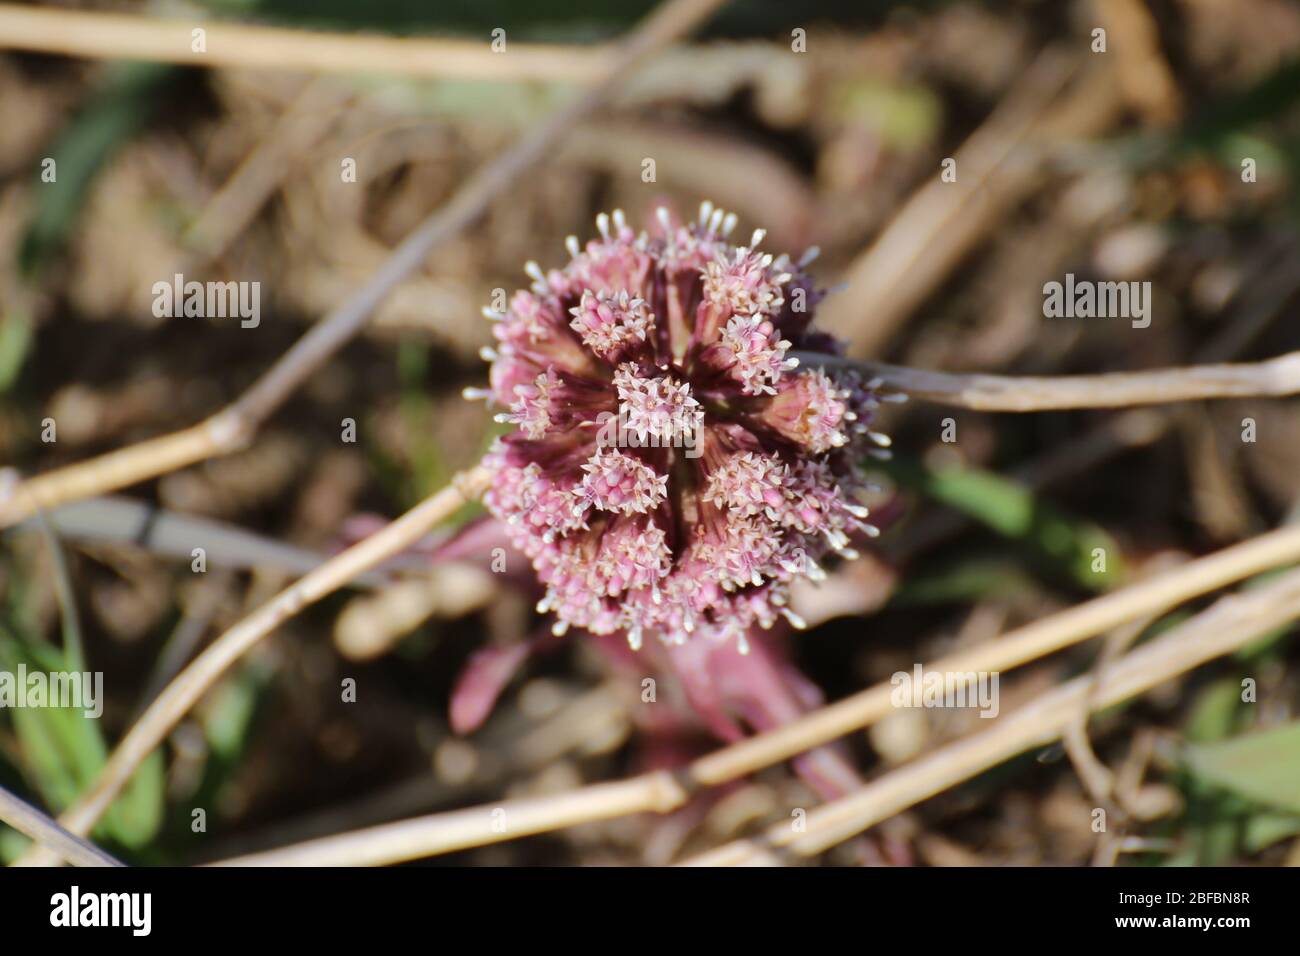 Blossoms of the common butterbur (Petasites hybridus) seen from the top.. Stock Photo